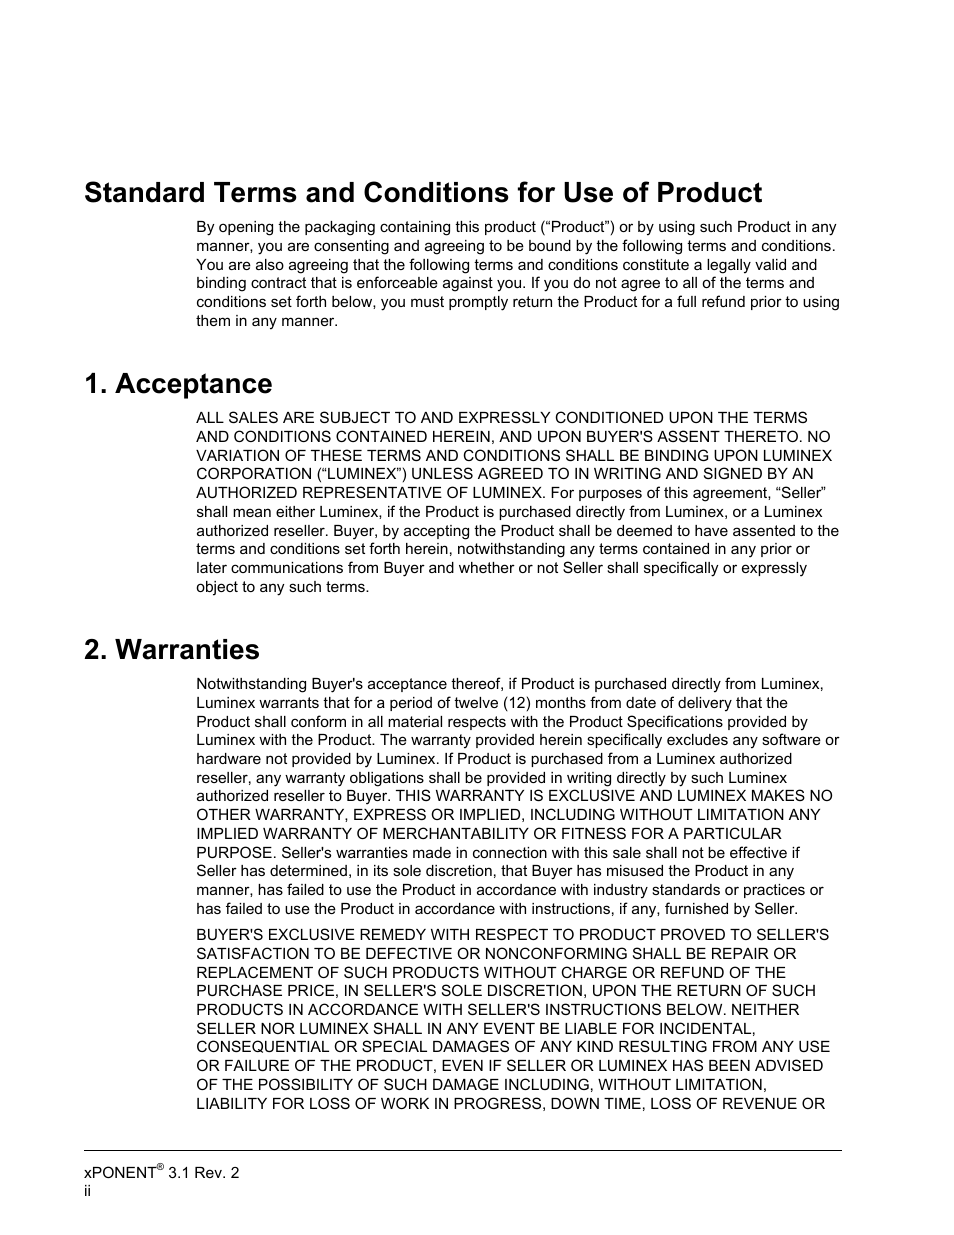 Standard terms and conditions for use of product, Acceptance, Warranties | Luminex xPONENT 3.1 Rev 2 User Manual | Page 3 / 145